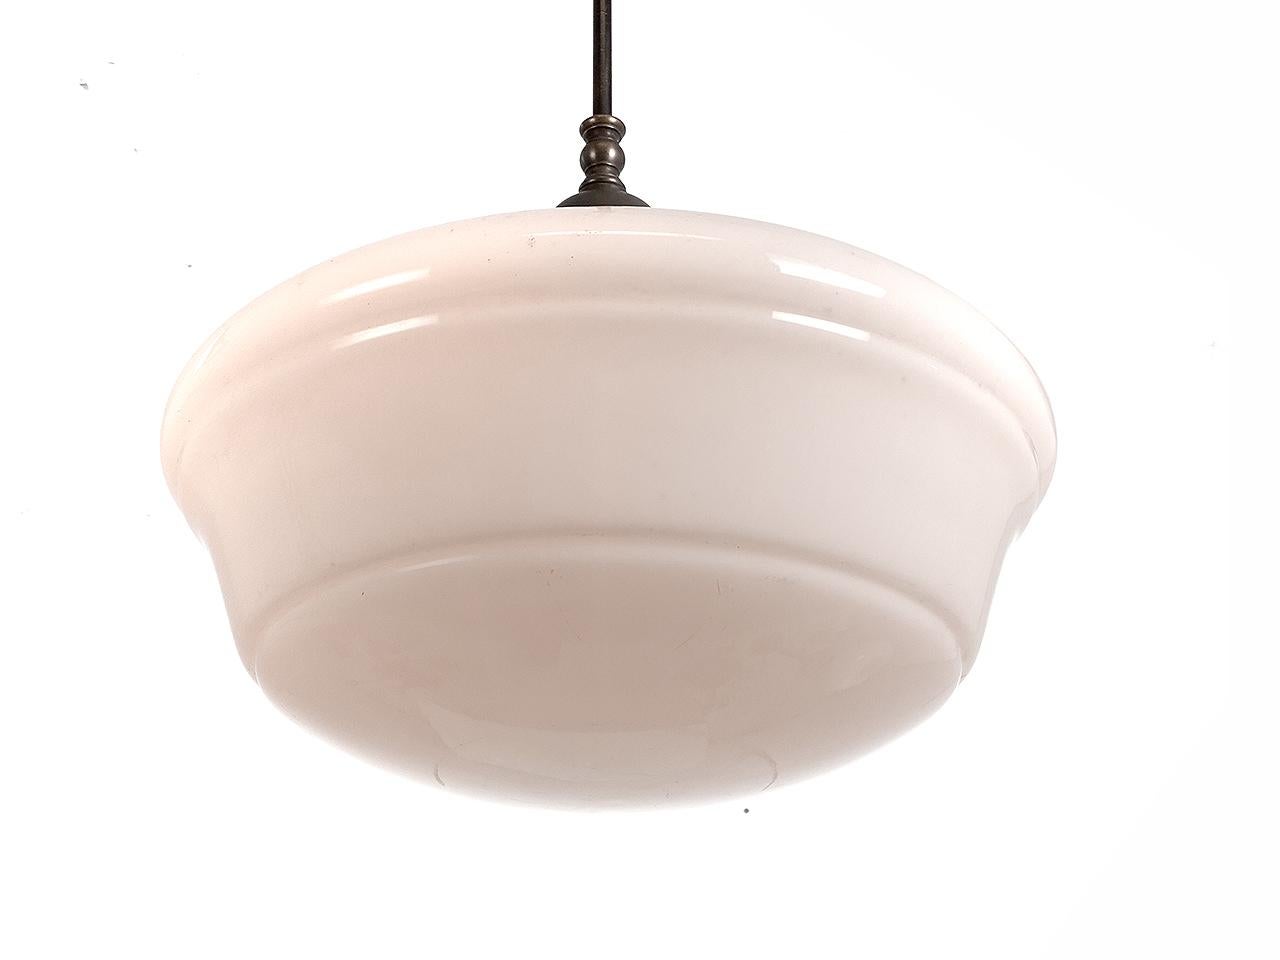 The 14 inch milk glass shade and brass holder are all original. The look is Classic. Only one in stock.